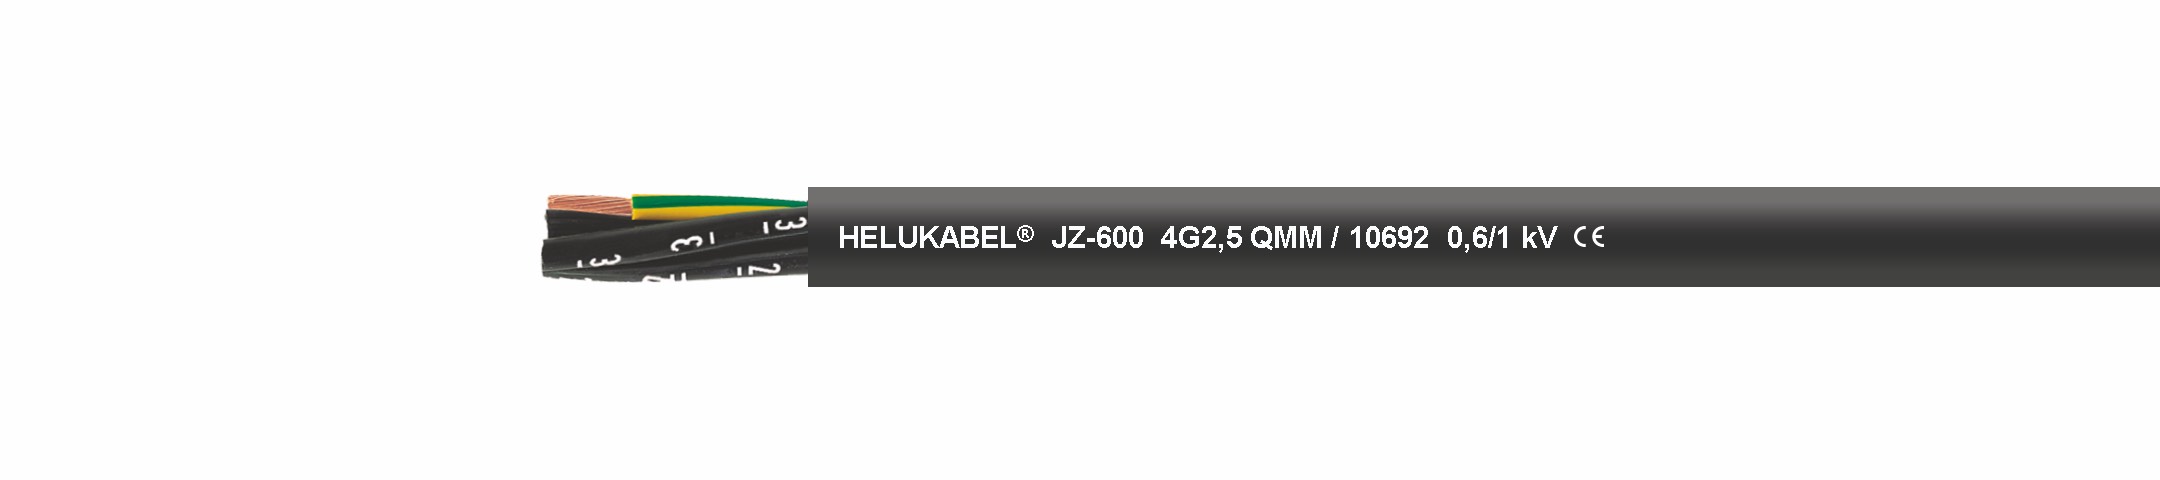 Cable Helukabel: JZ-600